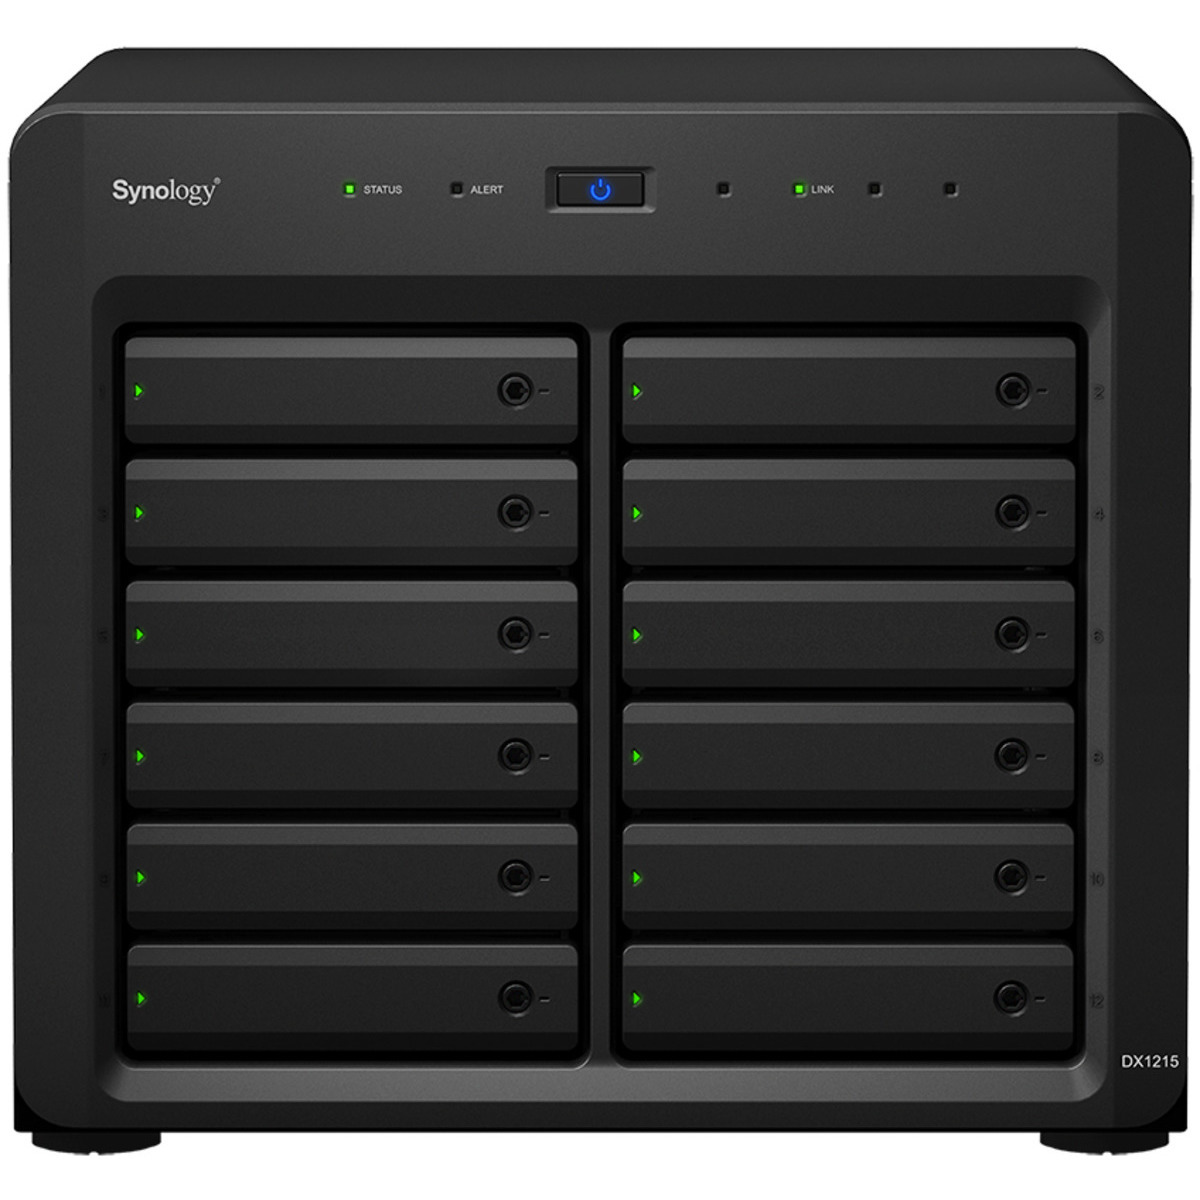 Synology DX1215II External Expansion Drive 40tb 12-Bay Desktop Multimedia / Power User / Business Expansion Enclosure 10x4tb Seagate IronWolf Pro ST4000NT001 3.5 7200rpm SATA 6Gb/s HDD NAS Class Drives Installed - Burn-In Tested DX1215II External Expansion Drive